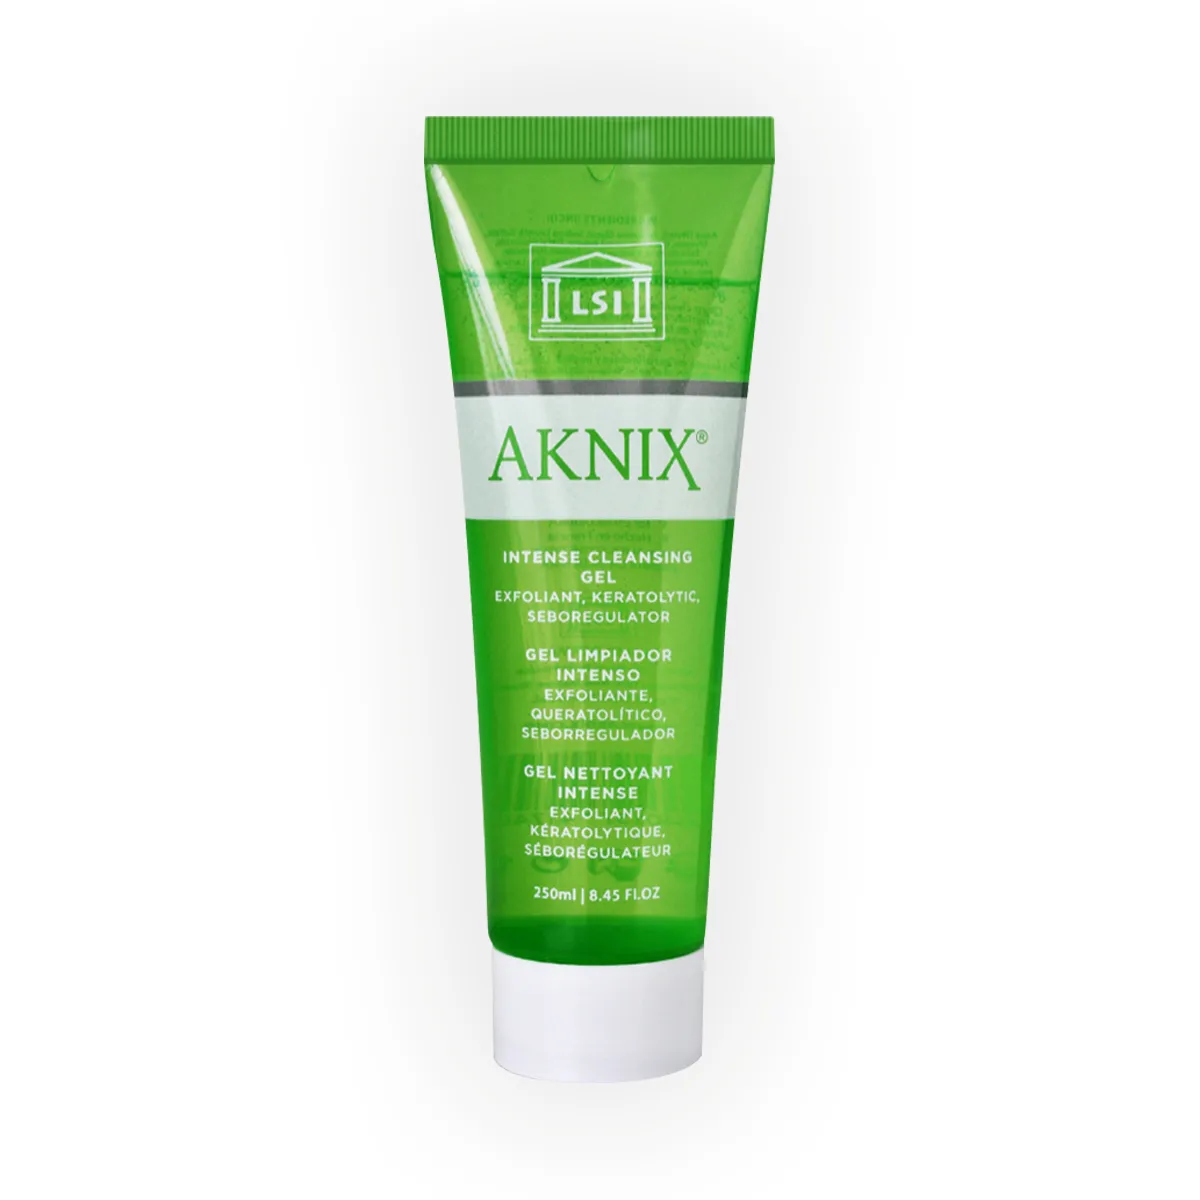 First product image of Aknix Intense Cleansing Gel 250ml